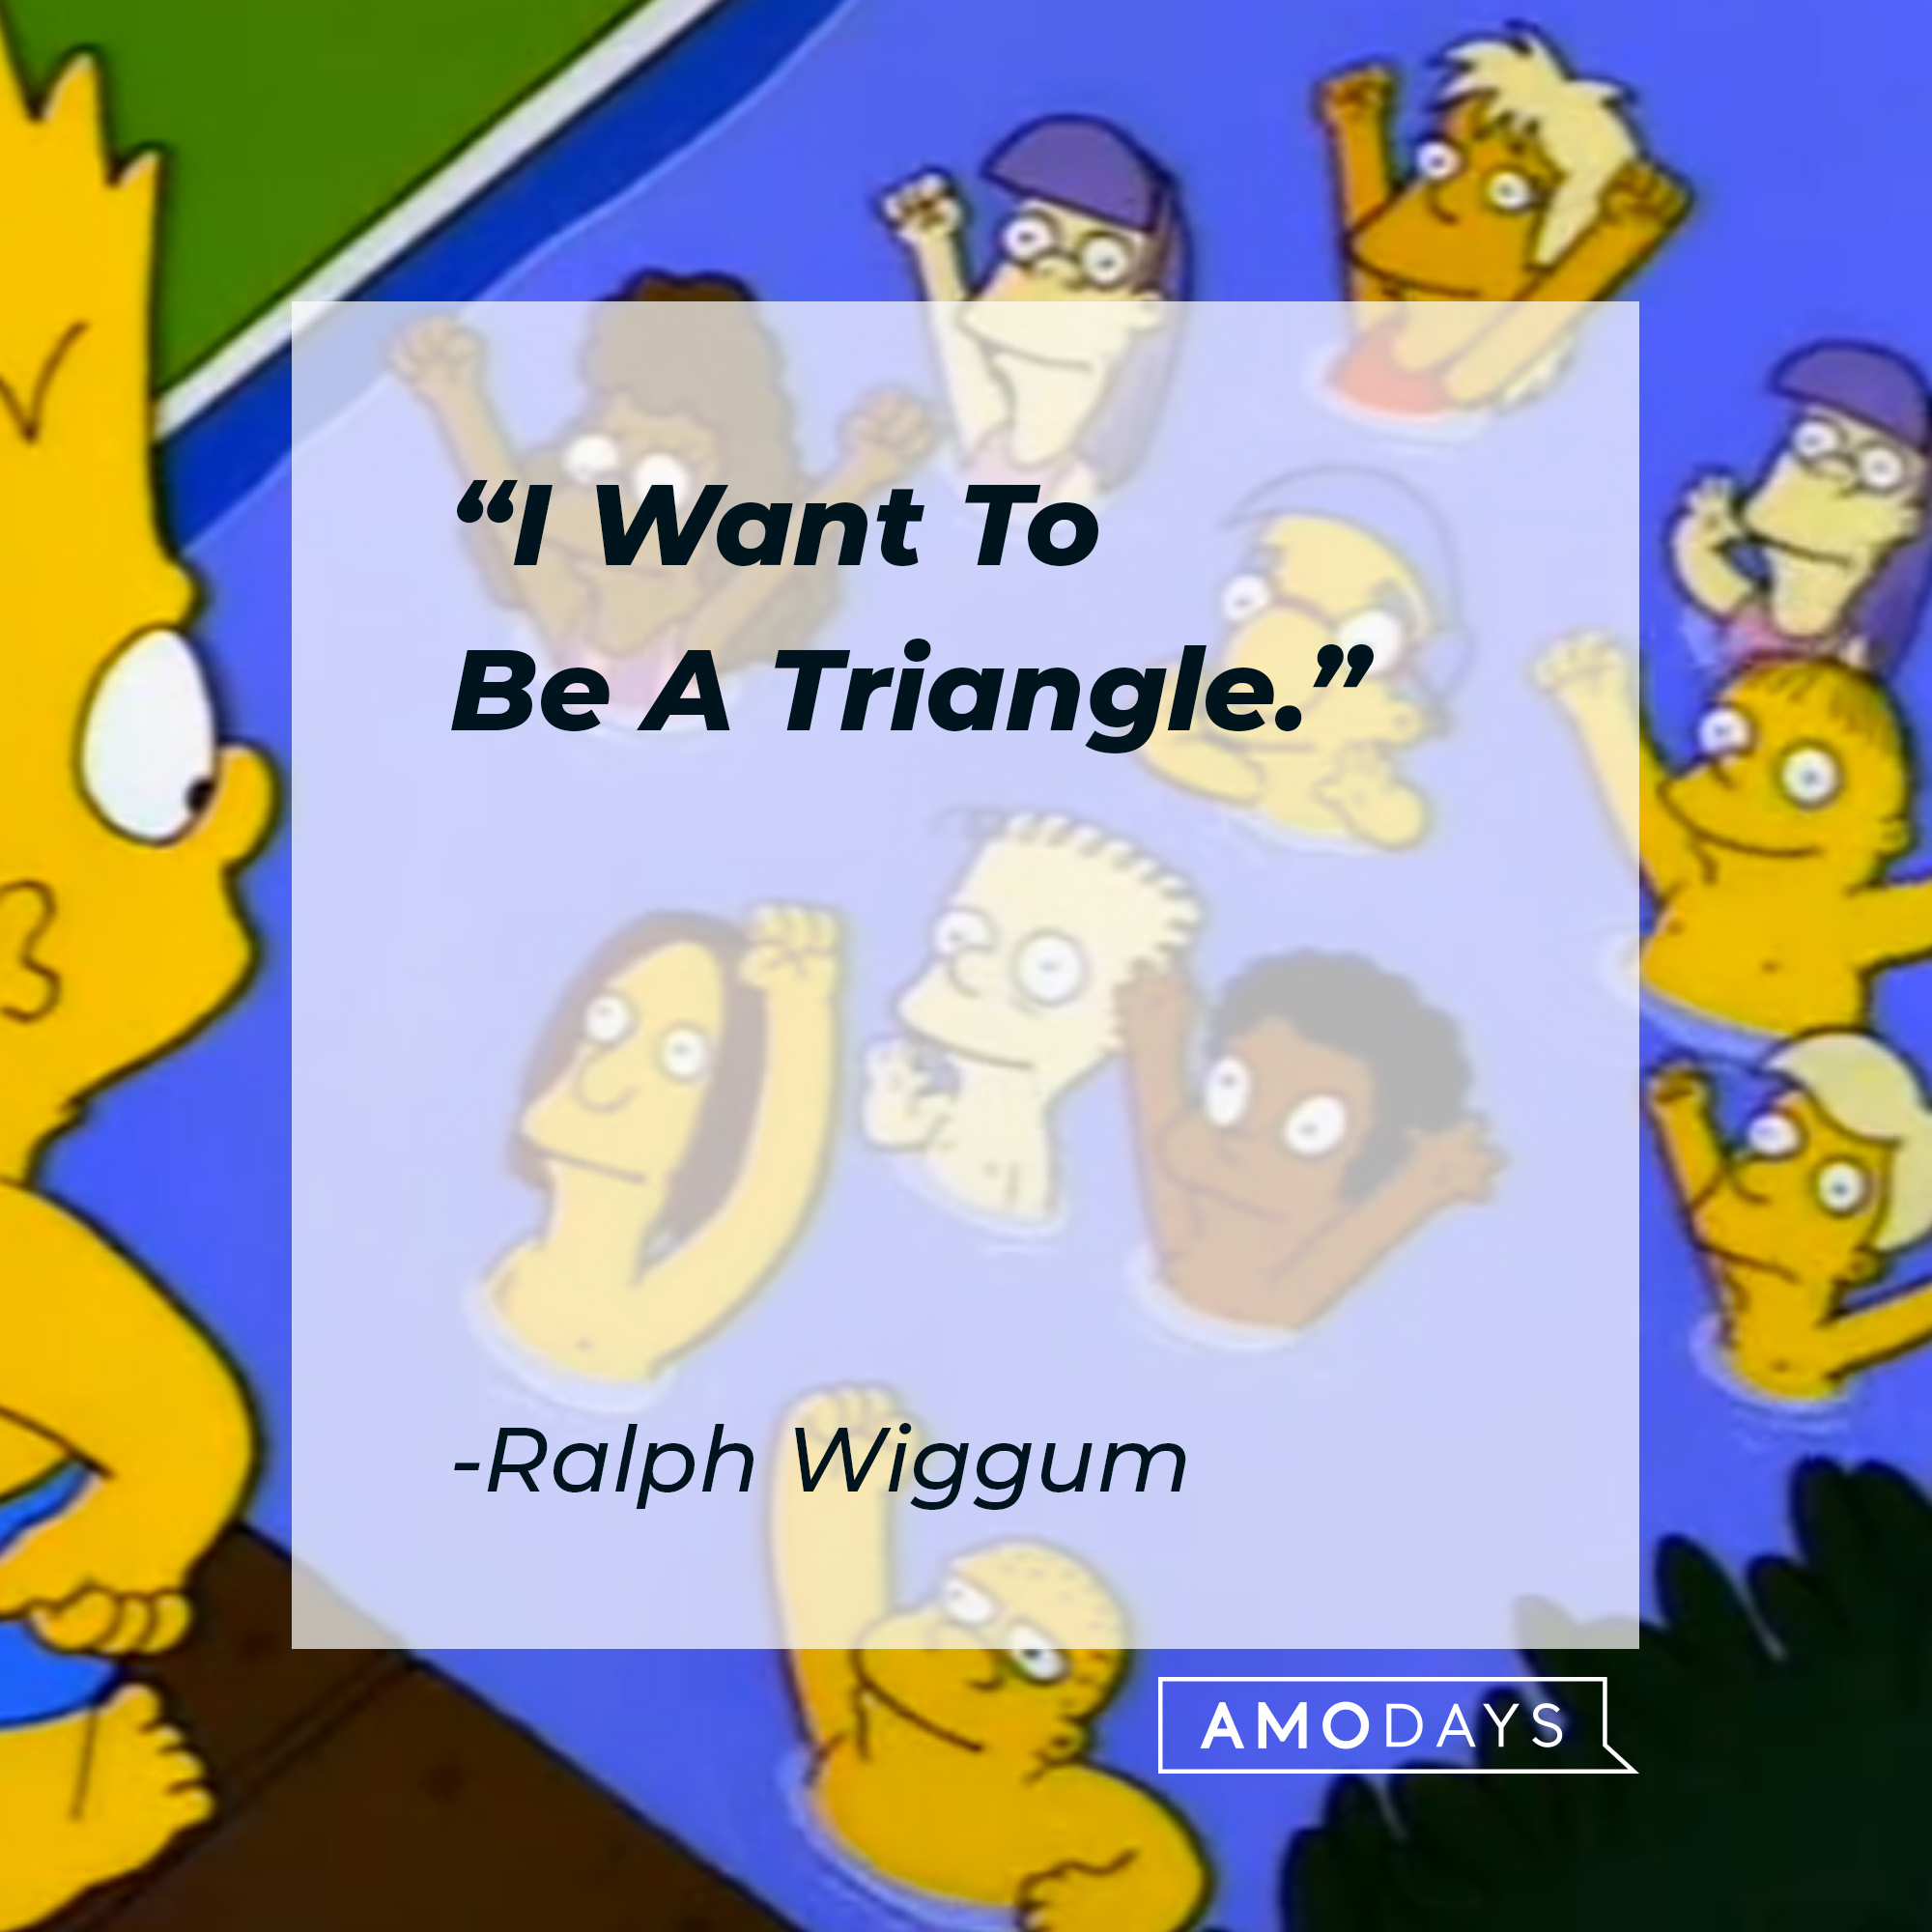 Ralph Wiggum's quote: "I Want To Be A Triangle." | Source: facebook.com/TheSimpsons